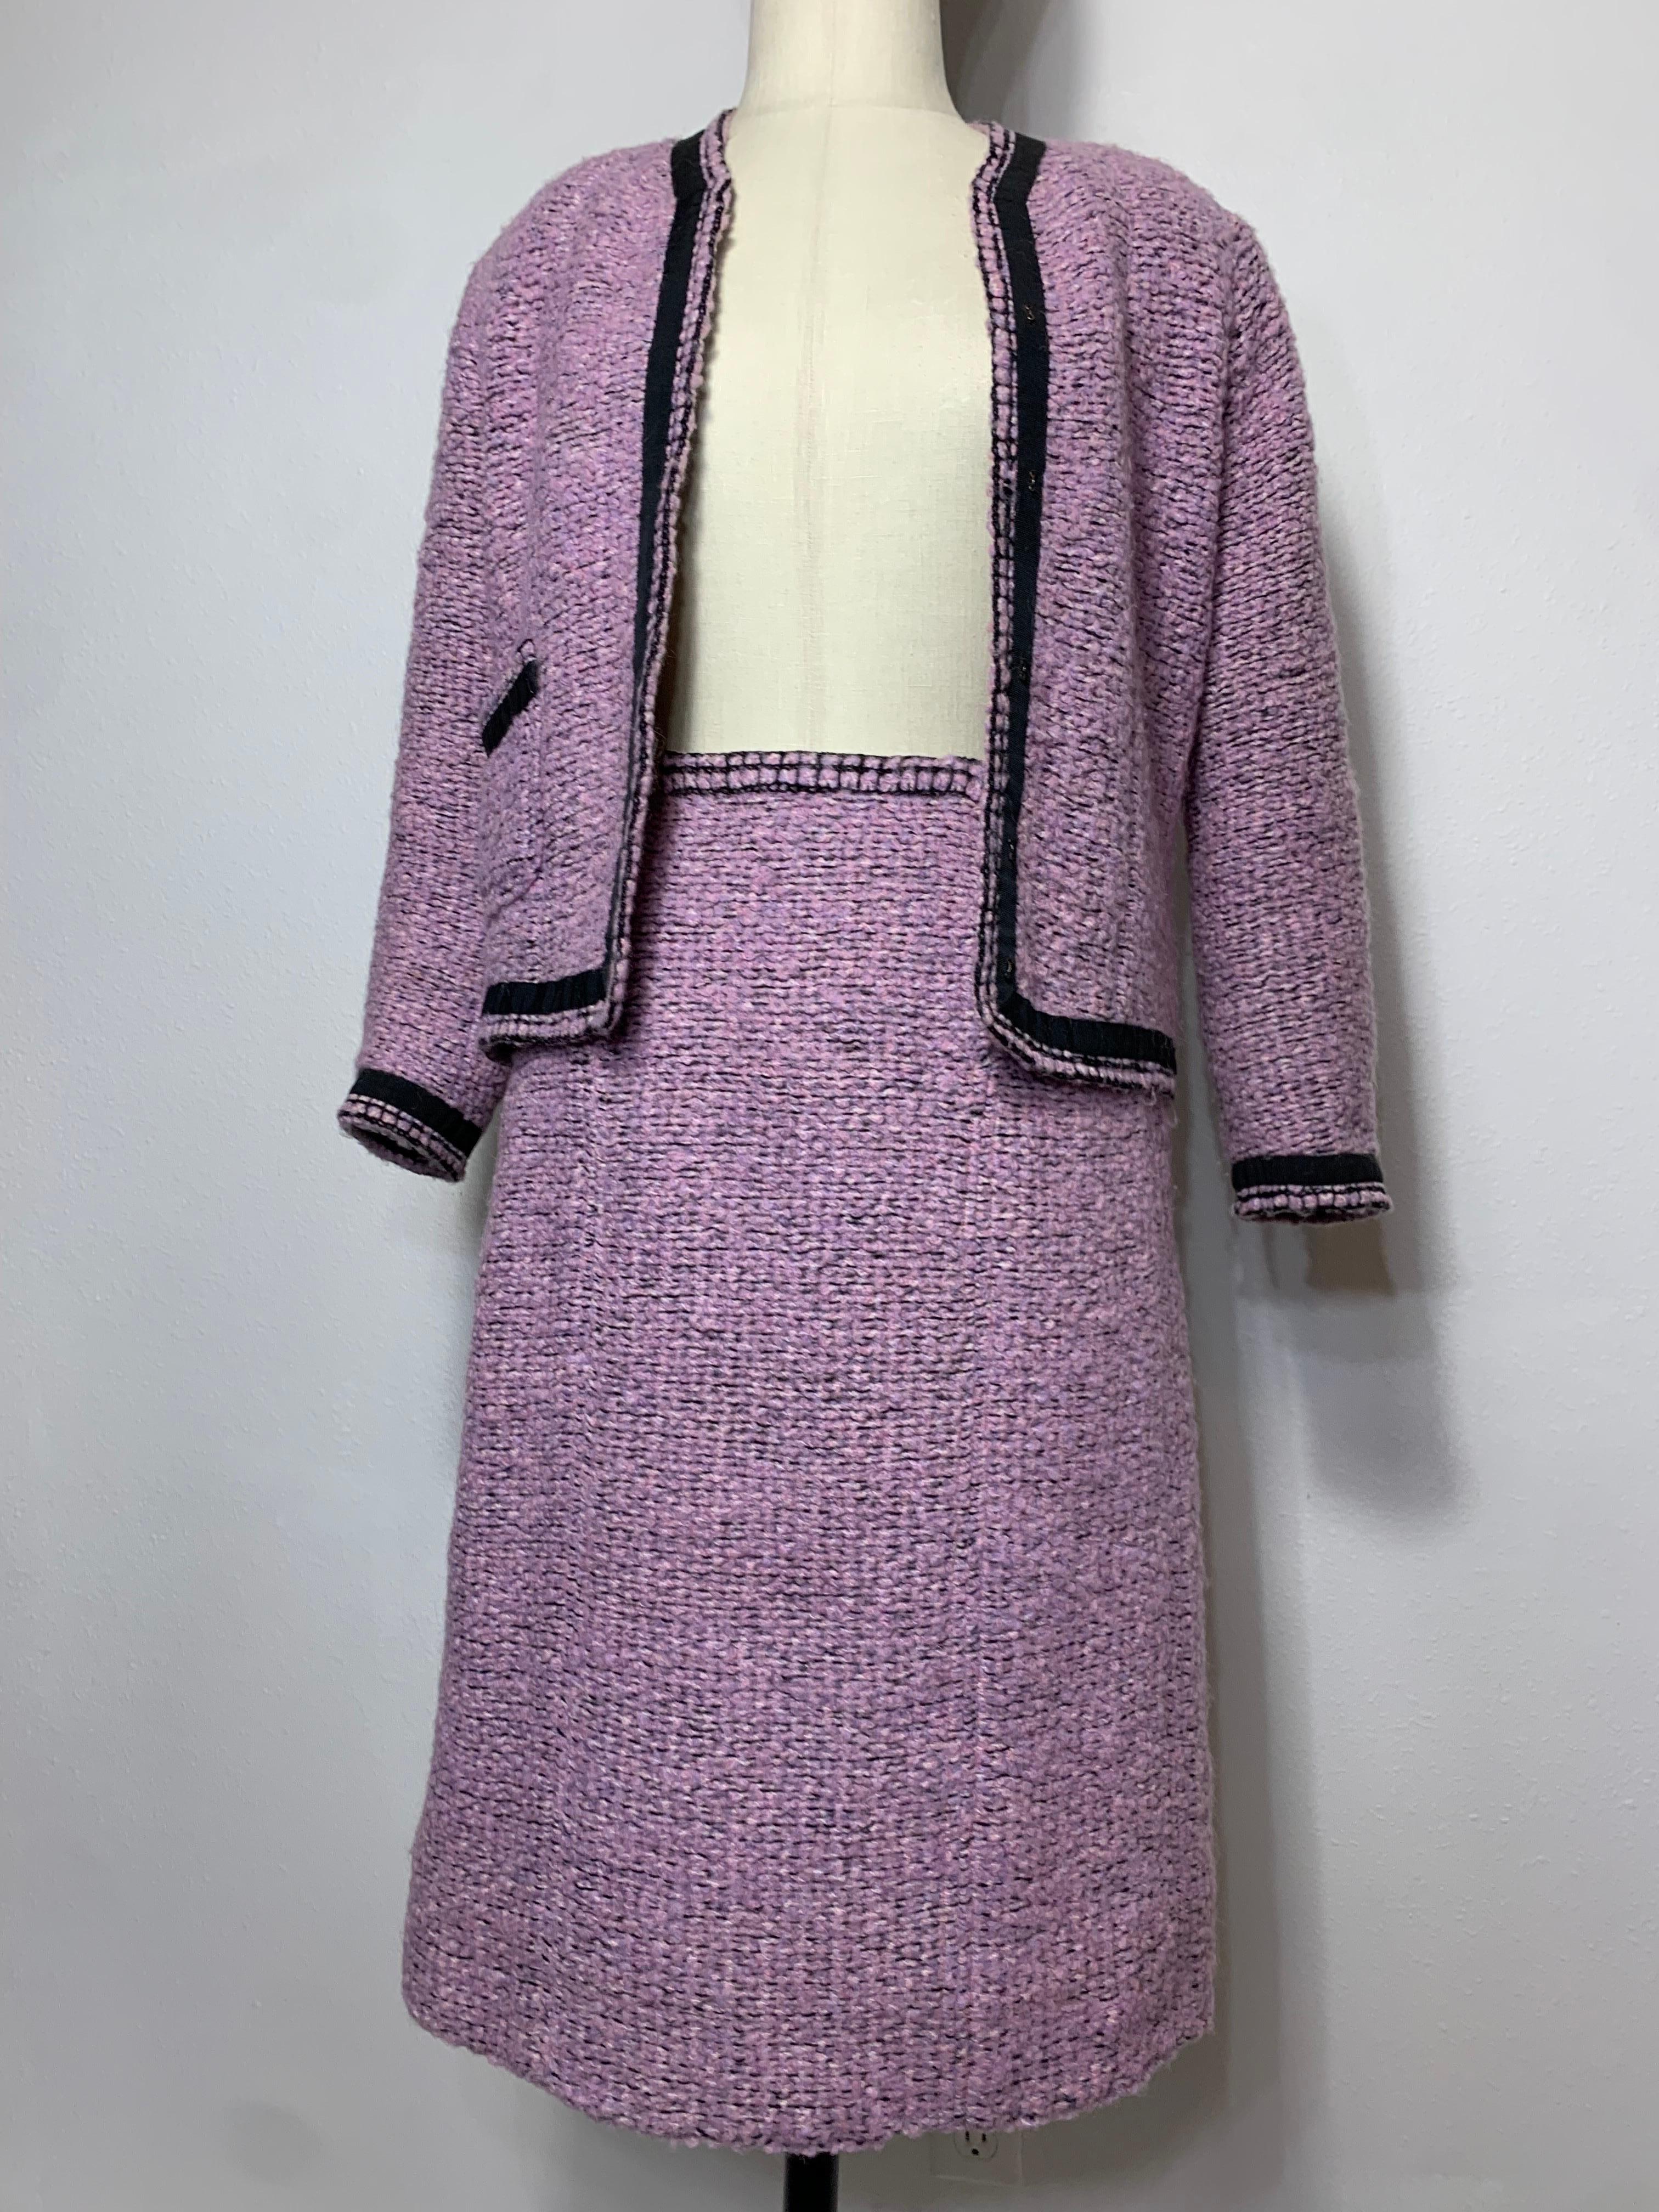 1960 Autumn/Winter Chanel Haute Couture Documented Lavender Tweed Skirt Suit  For Sale 8